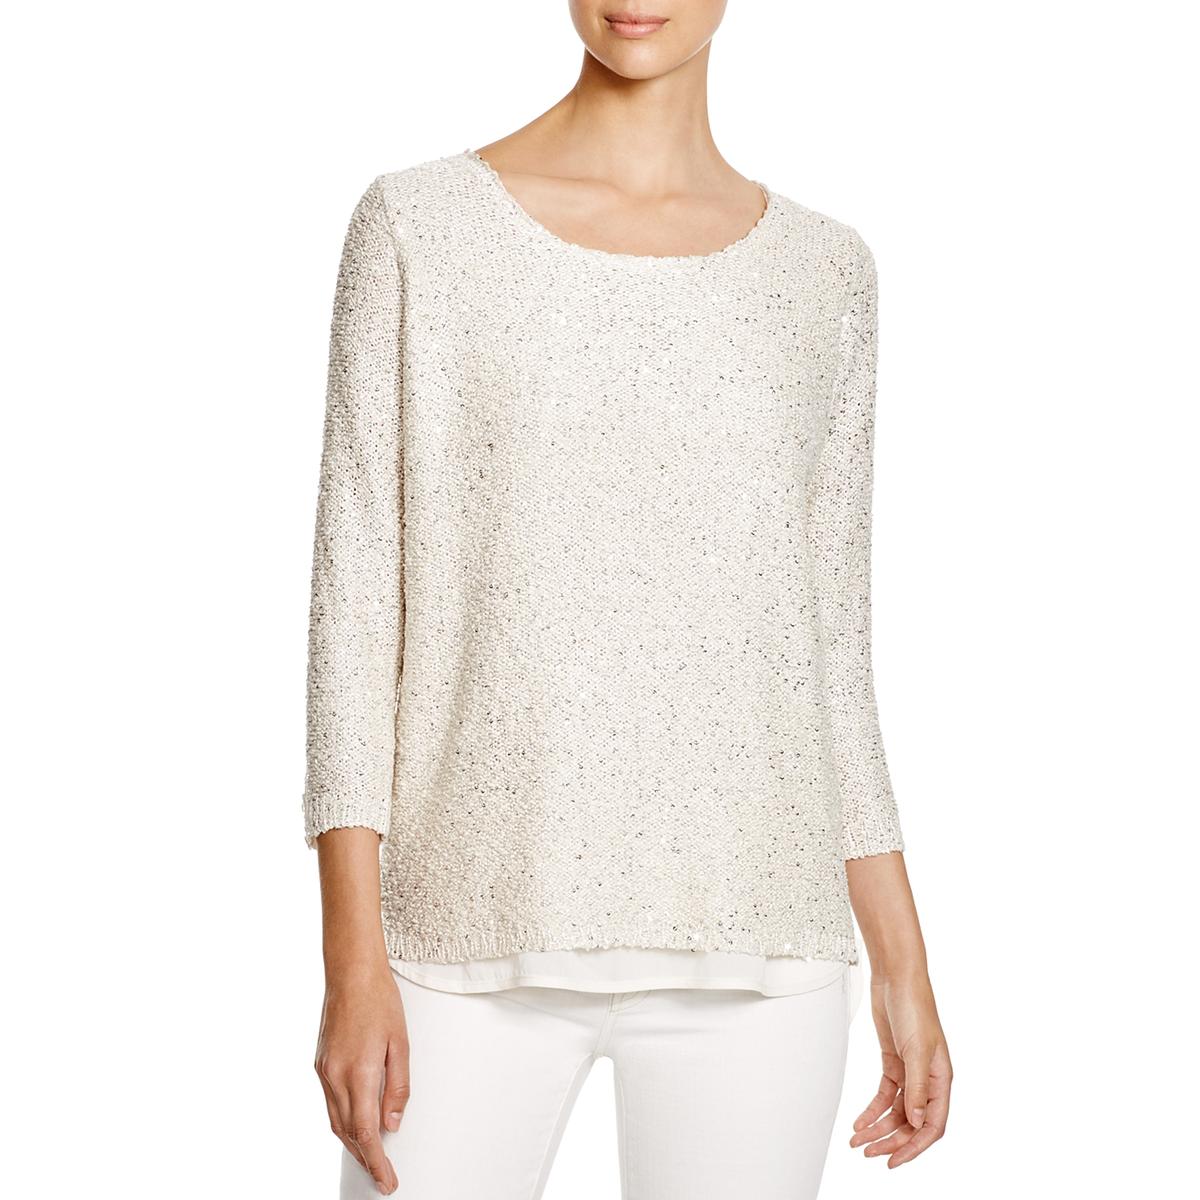 Sioni Womens Ivory Metallic Knit Sequined Sweater Top XL BHFO 9633 | eBay